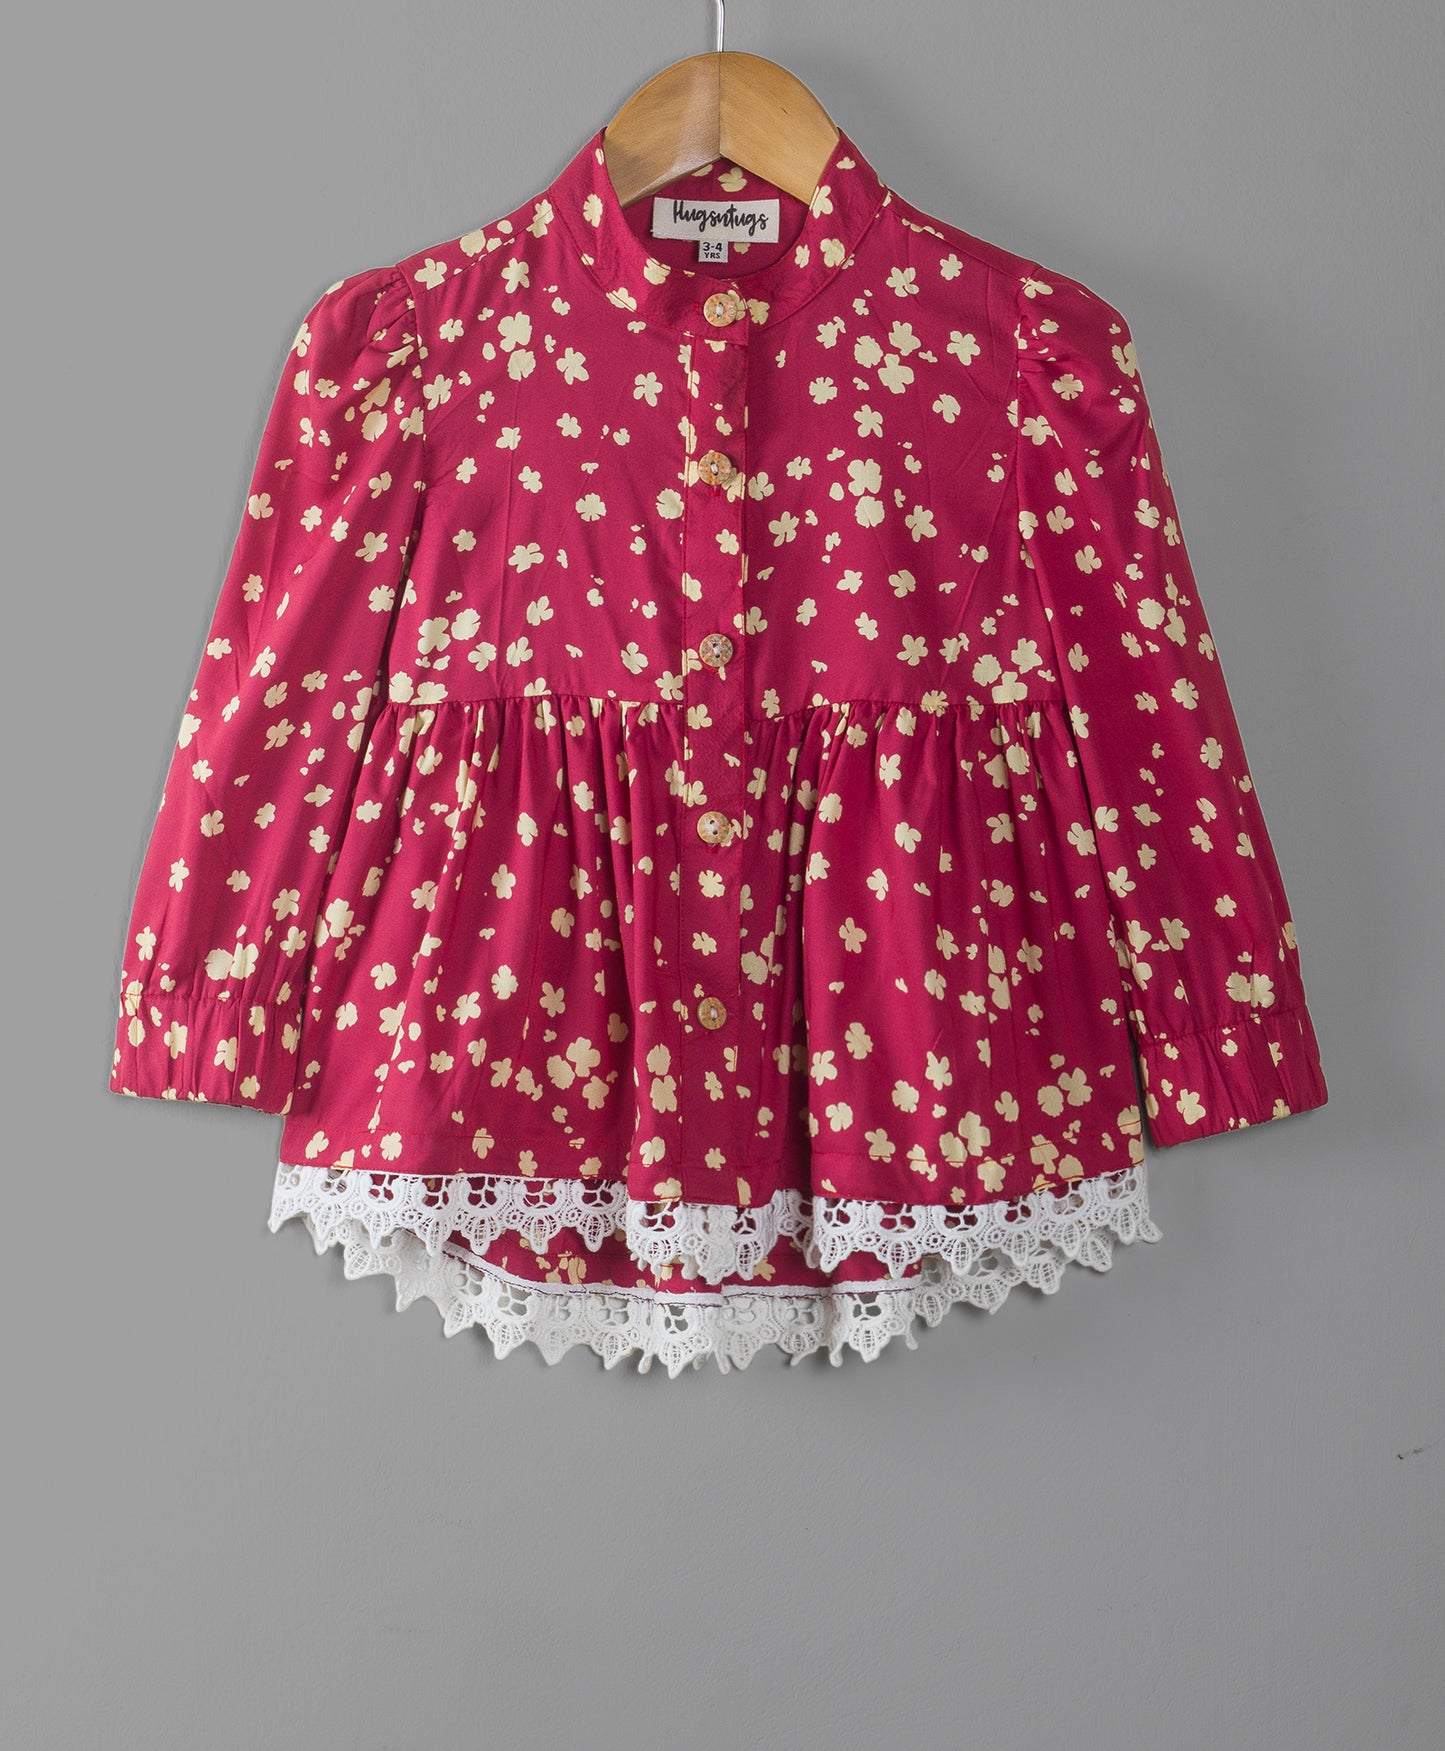 ALL OVER SMALL FLOWER PRINT MAROON TOP WITH LACE AT THE BOTTOM EDGE